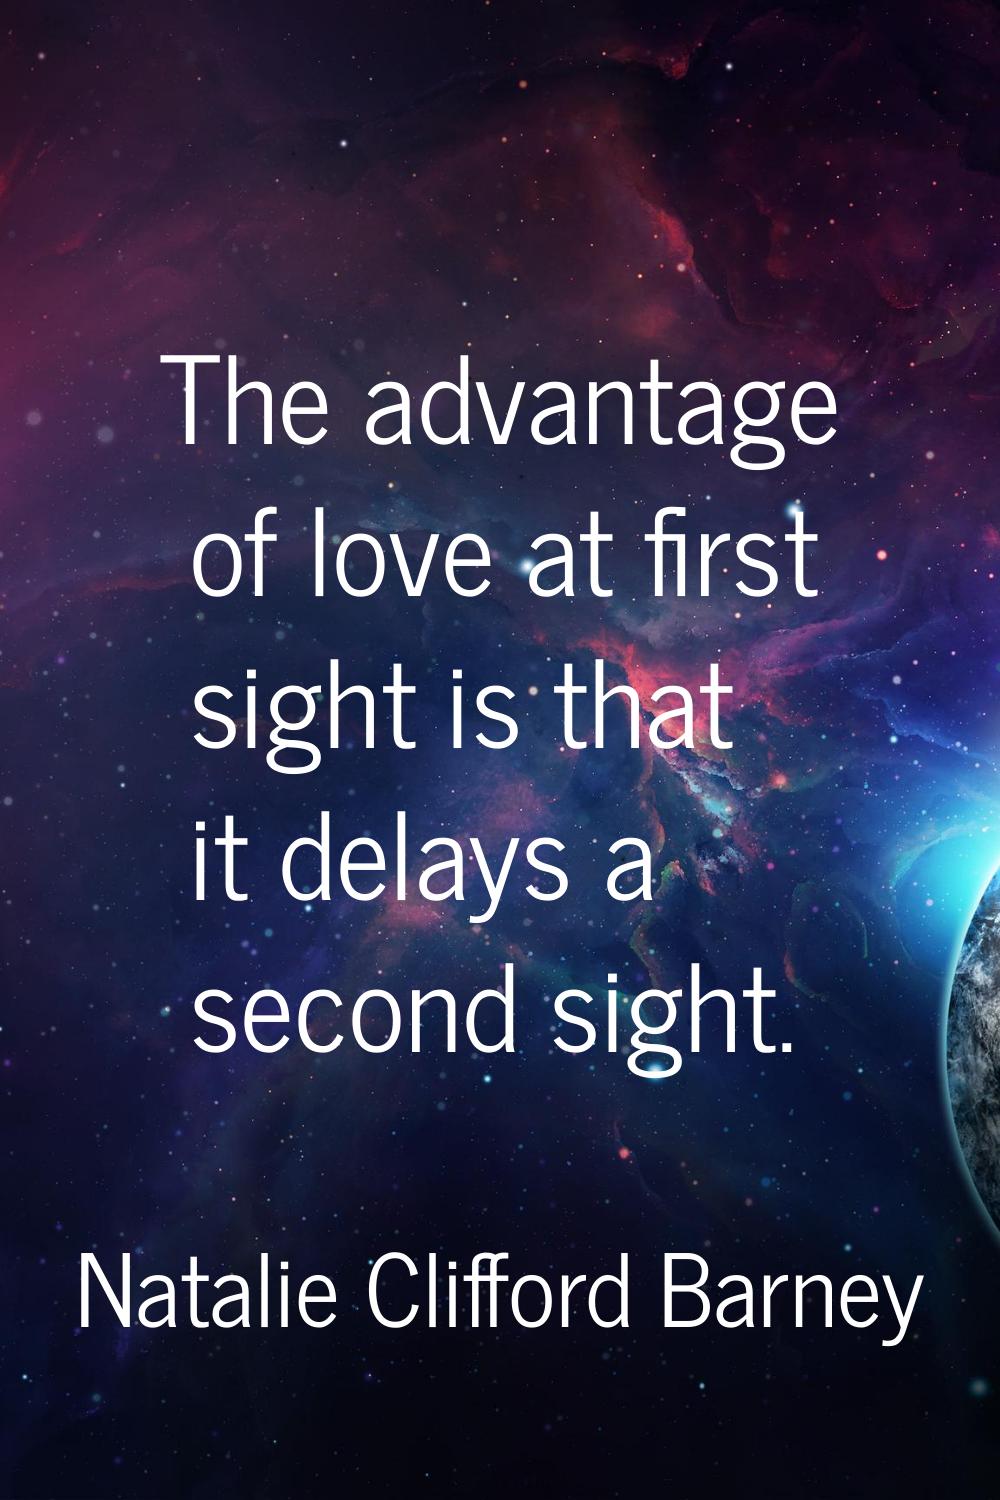 The advantage of love at first sight is that it delays a second sight.